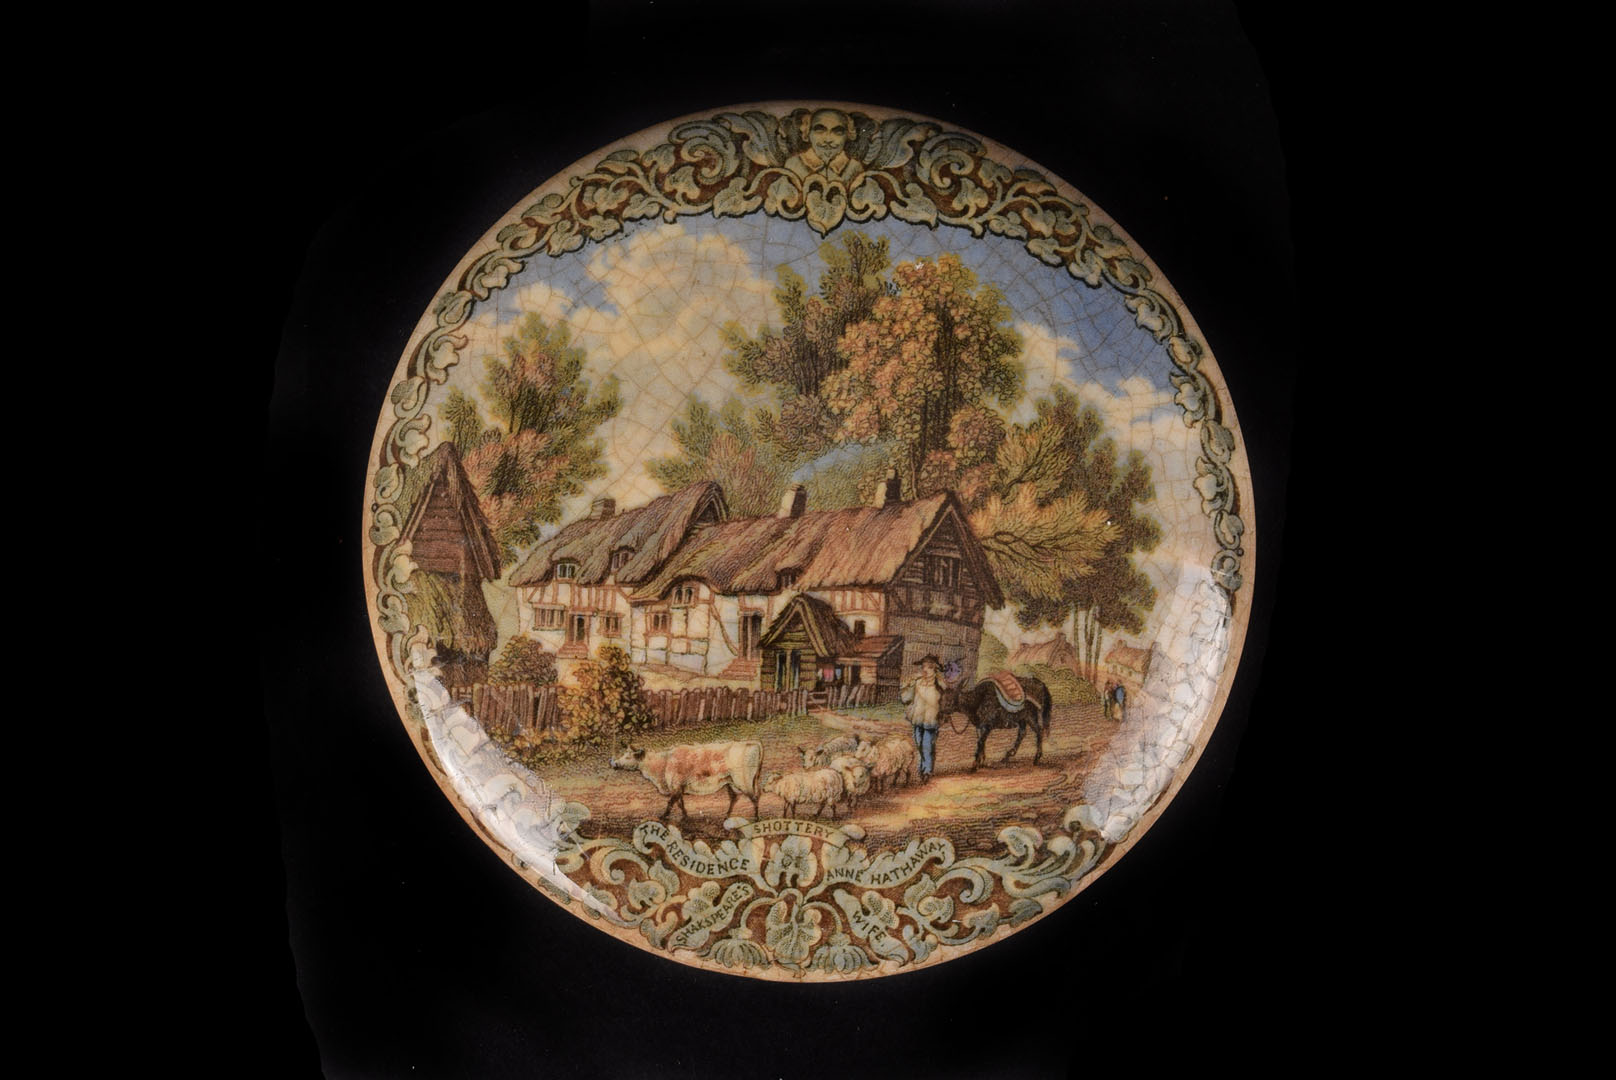 A Staffordshire pot lid, with Anne Hathaway's Cottage in oak leaf and scroll border, cracked and